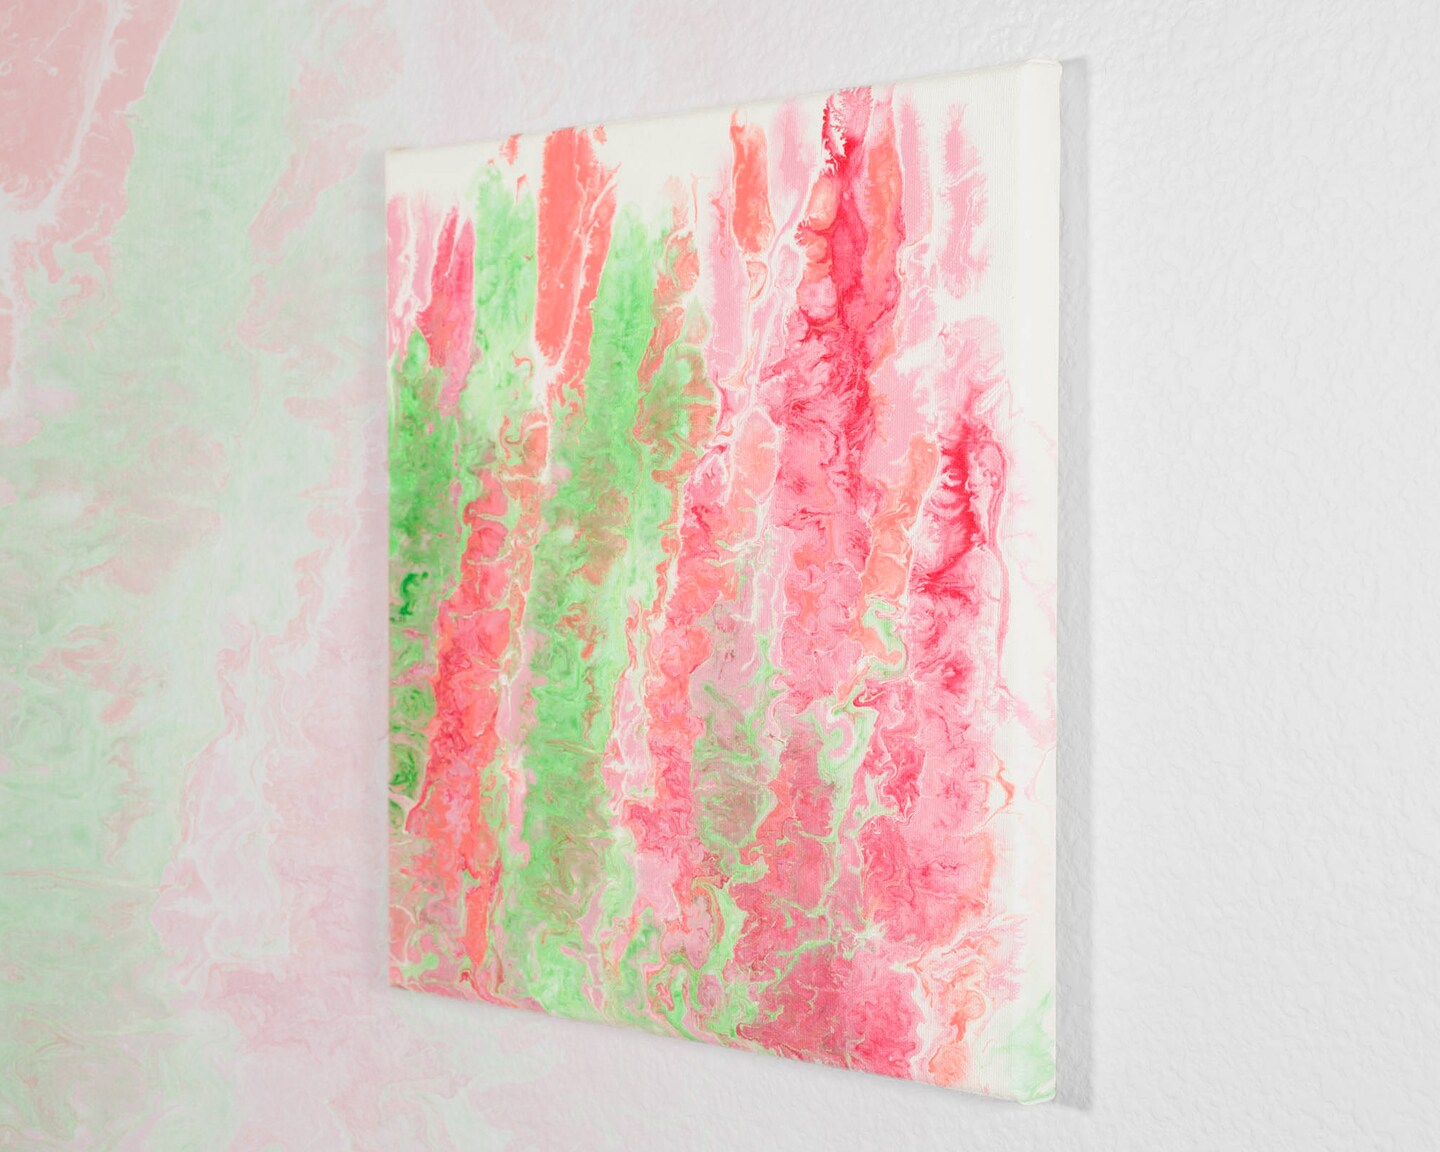 ORIGINAL Fluid Acrylic Pour Painting, Pink and Green Abstract Canvas Wall  Art, Cheap Bedroom Decor, Original Painting, 12x12 Canvas